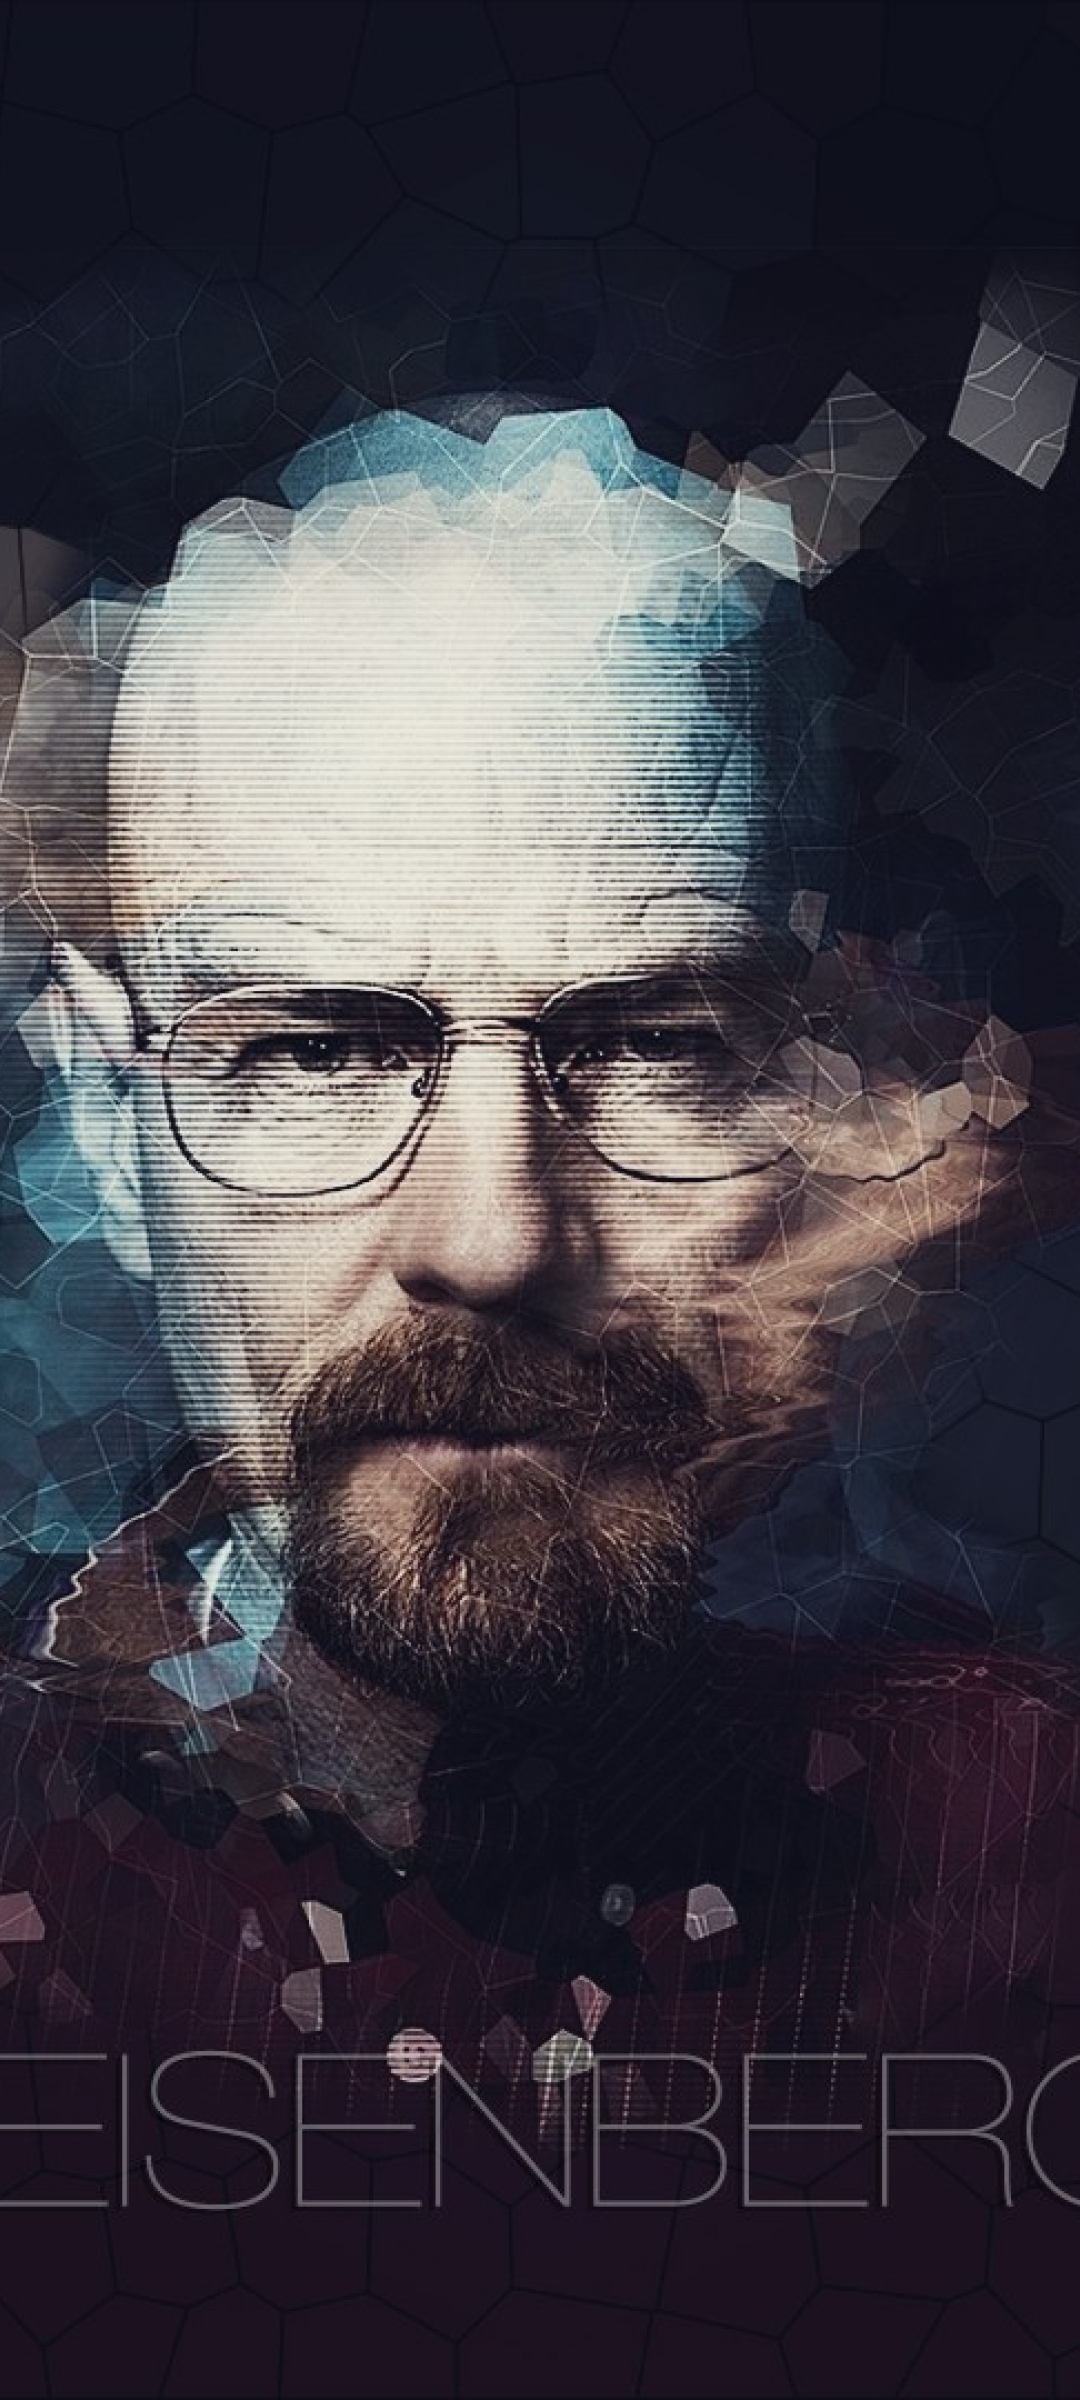 Badass psychedelic Walter White wallpaper xpost from rwallpaper   rbreakingbad